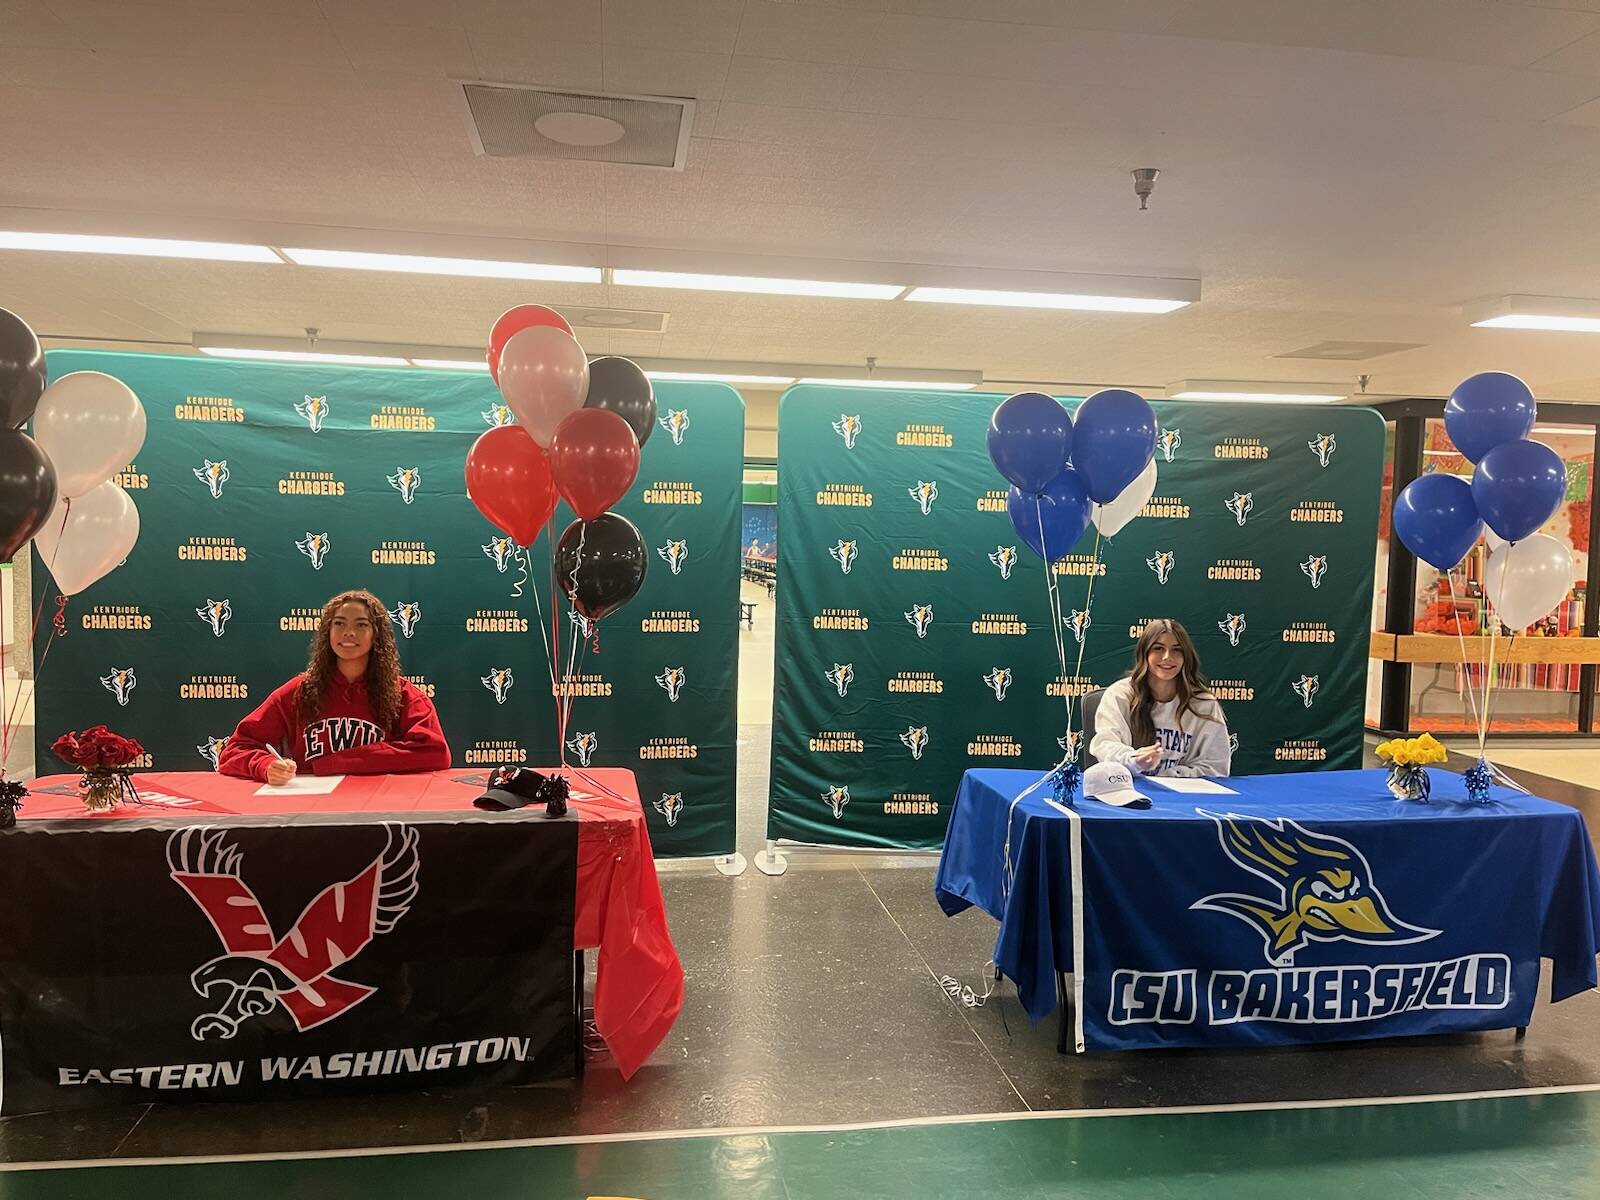 Senior midfielder Jayda Sparks (left) signed to Eastern Washington University and forward/defender Ella Schug (right) committed to Cal State University at Bakersfield. (Photo provided by John Flanigan)